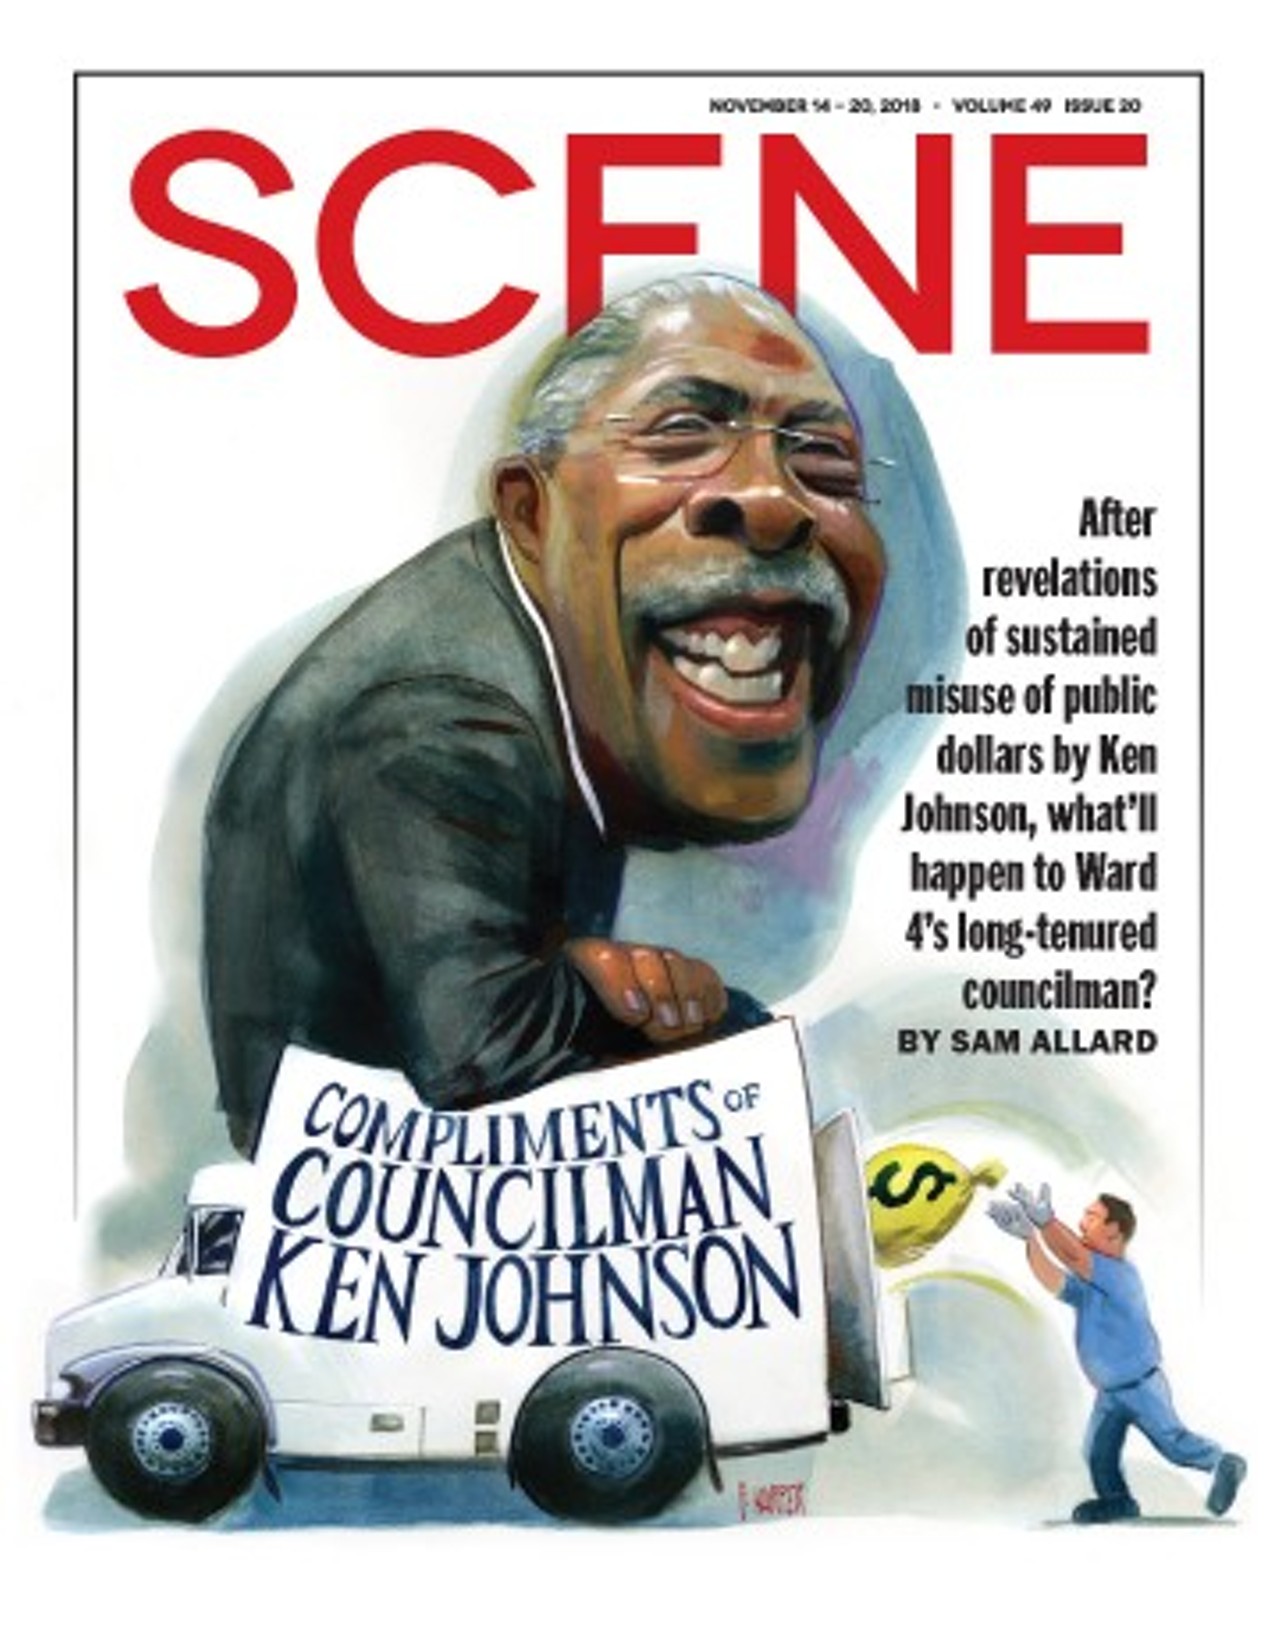  &#147;Cleveland Councilman Ken Johnson Arrested on Corruption Charges&#148;
February 23rd 
&#147;Cleveland City Councilman Ken Johnson was arrested by local FBI officers Tuesday morning after a federal grand jury indicted him on 15 corruption-related charges. The charges stem, per the Department of Justice, from a scheme in which Johnson and his assistant, Garnell Jamison, defrauded the city by submitting false monthly expense reports for a decade. Johnson received the $1,200 monthly maximum as reimbursement for "ward services" that were never performed. Johnson is also alleged to have benefitted from federal dollars he steered to the Buckeye Shaker Square Development Corporation.&#148;